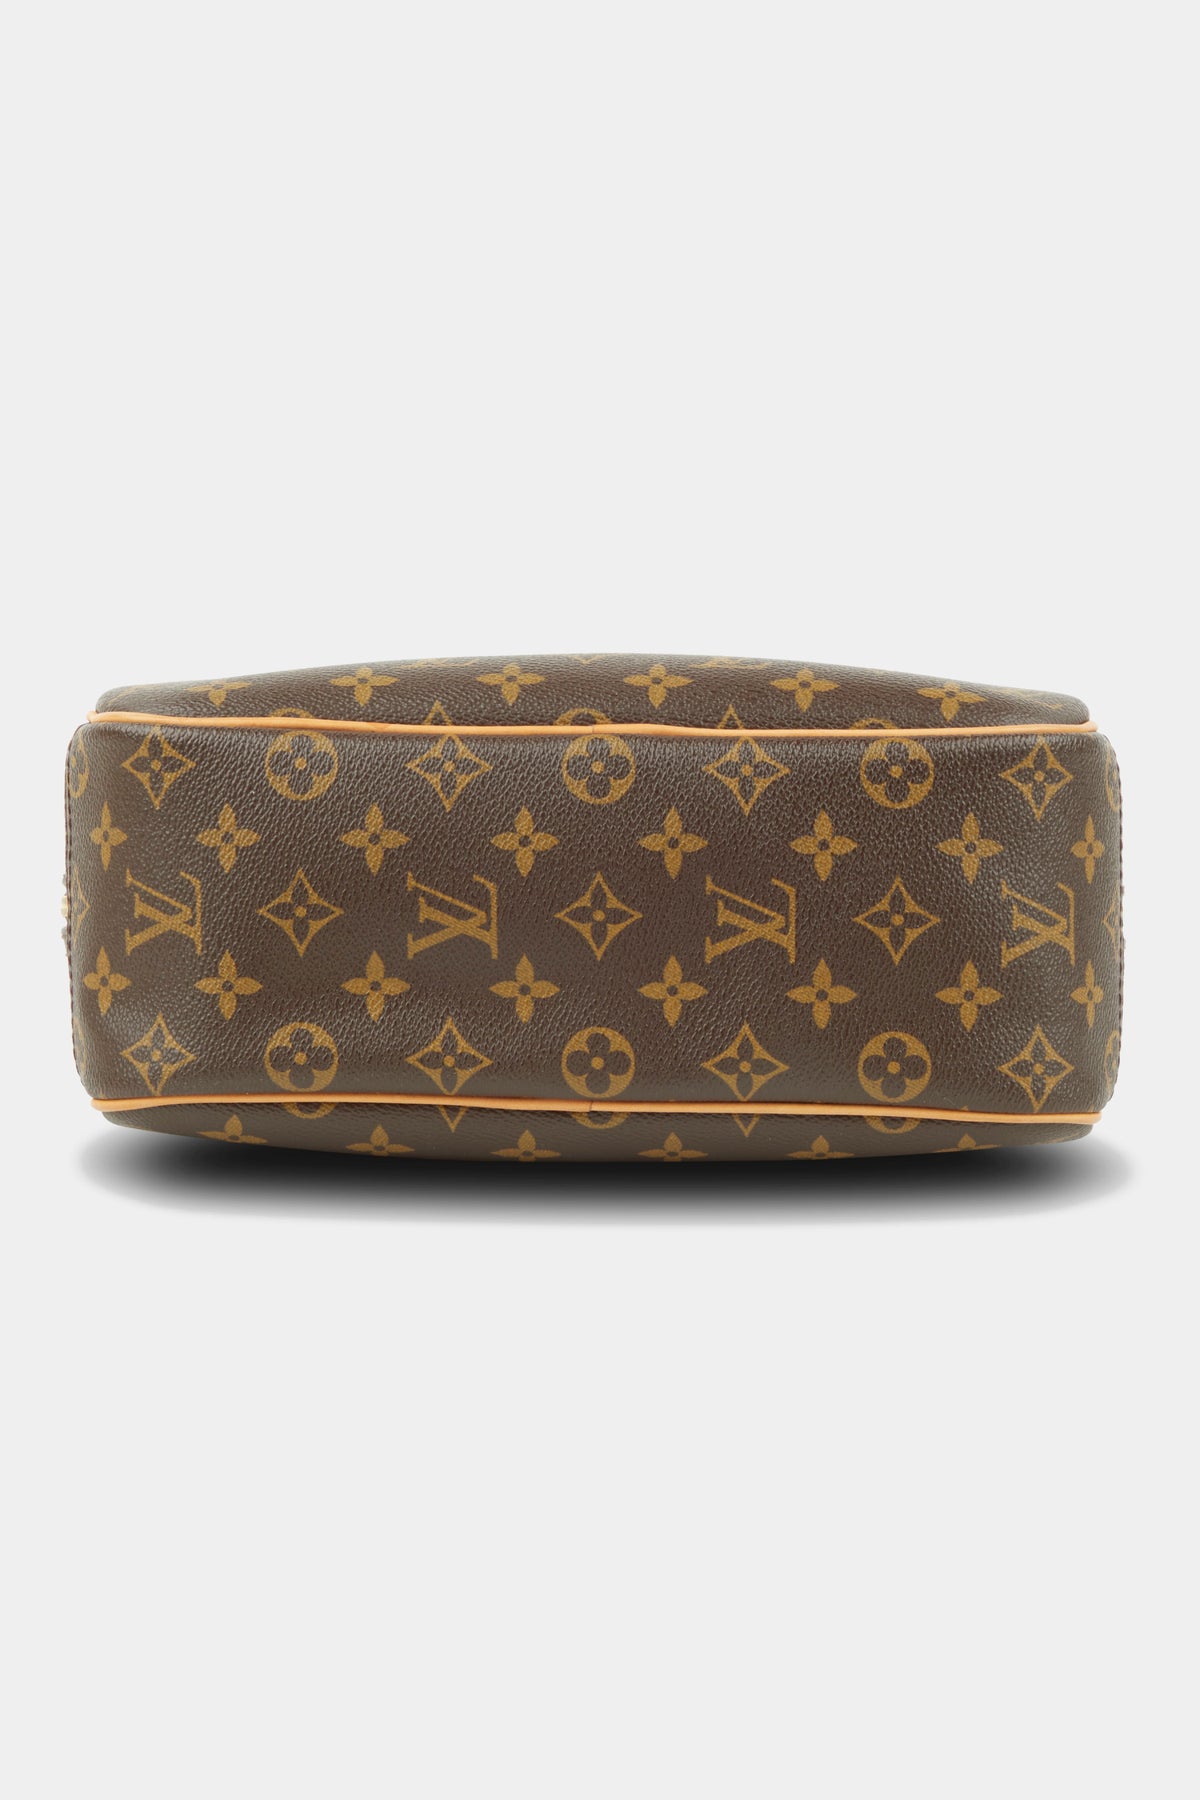 LV Trouville Monogram Handbag - clothing & accessories - by owner